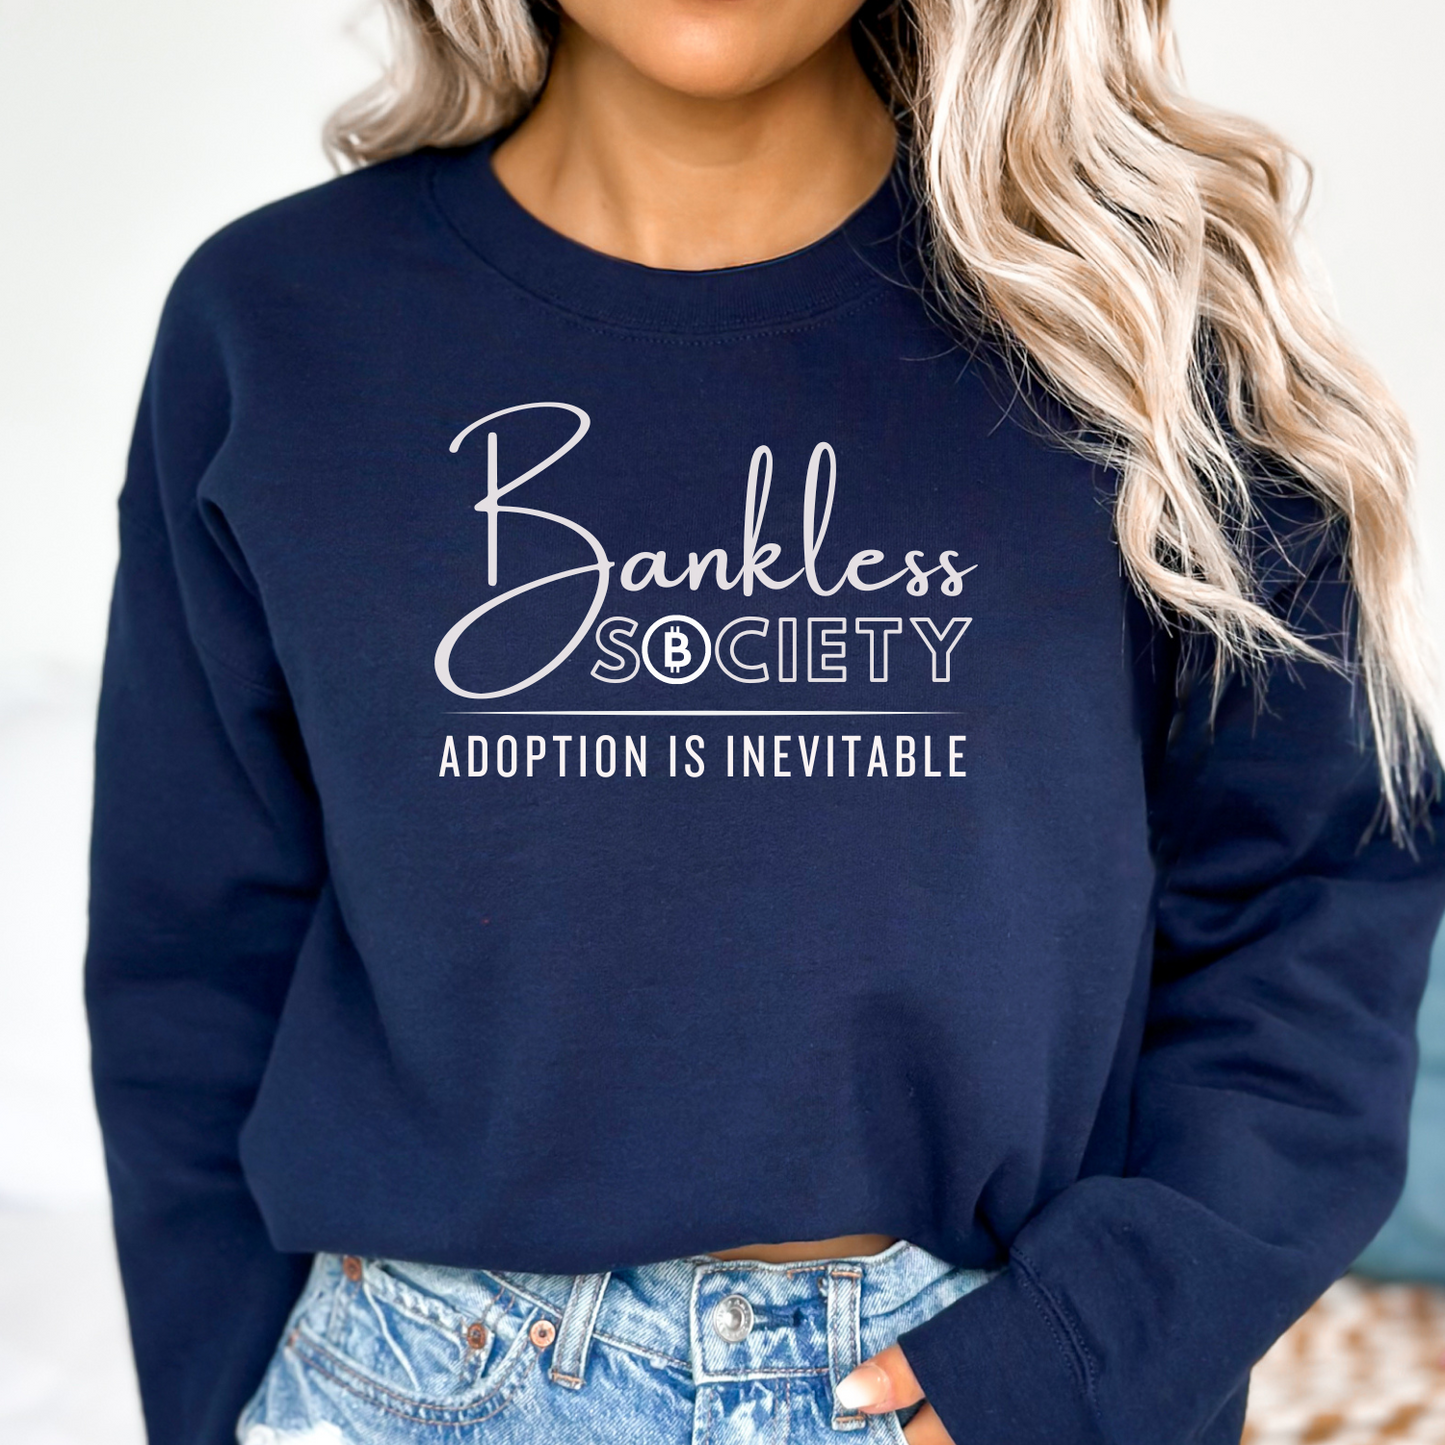 Navy sweatshirt with crypto currency design for supporters of digital finance and a bankless society.